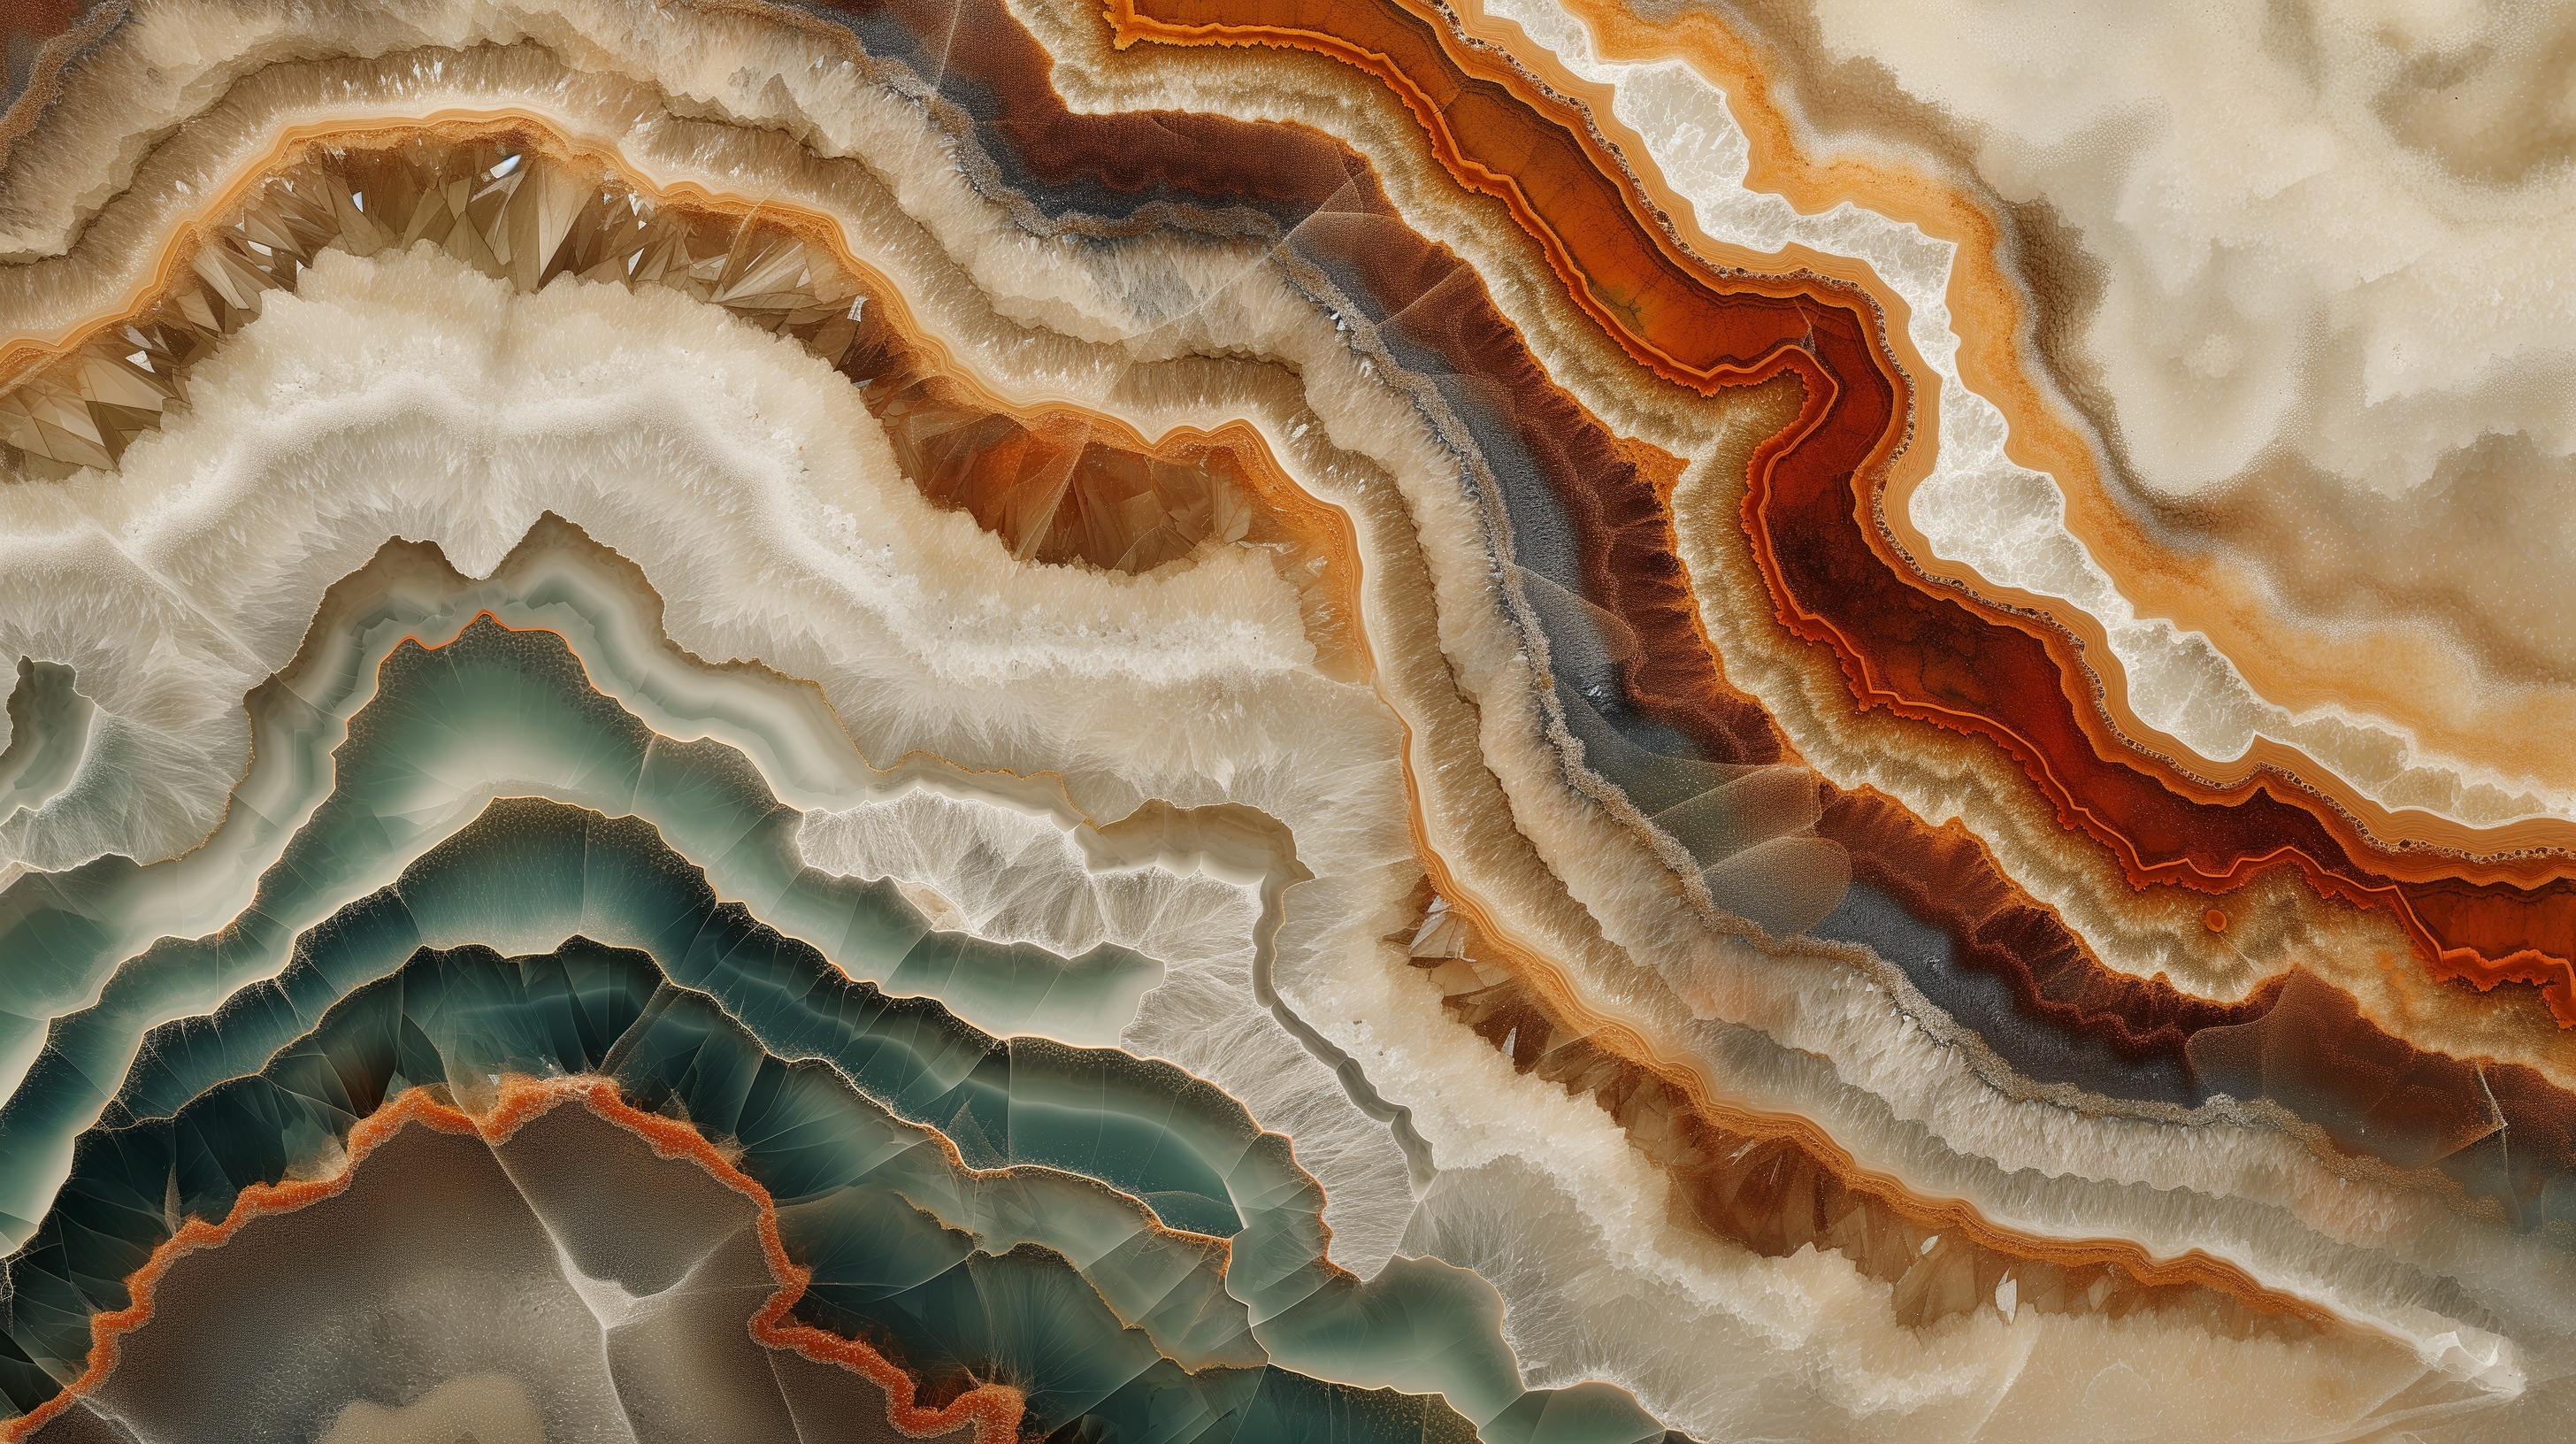 HD wallpaper of a beautiful geode with layers of brown, orange, and white, perfect for a desktop background.